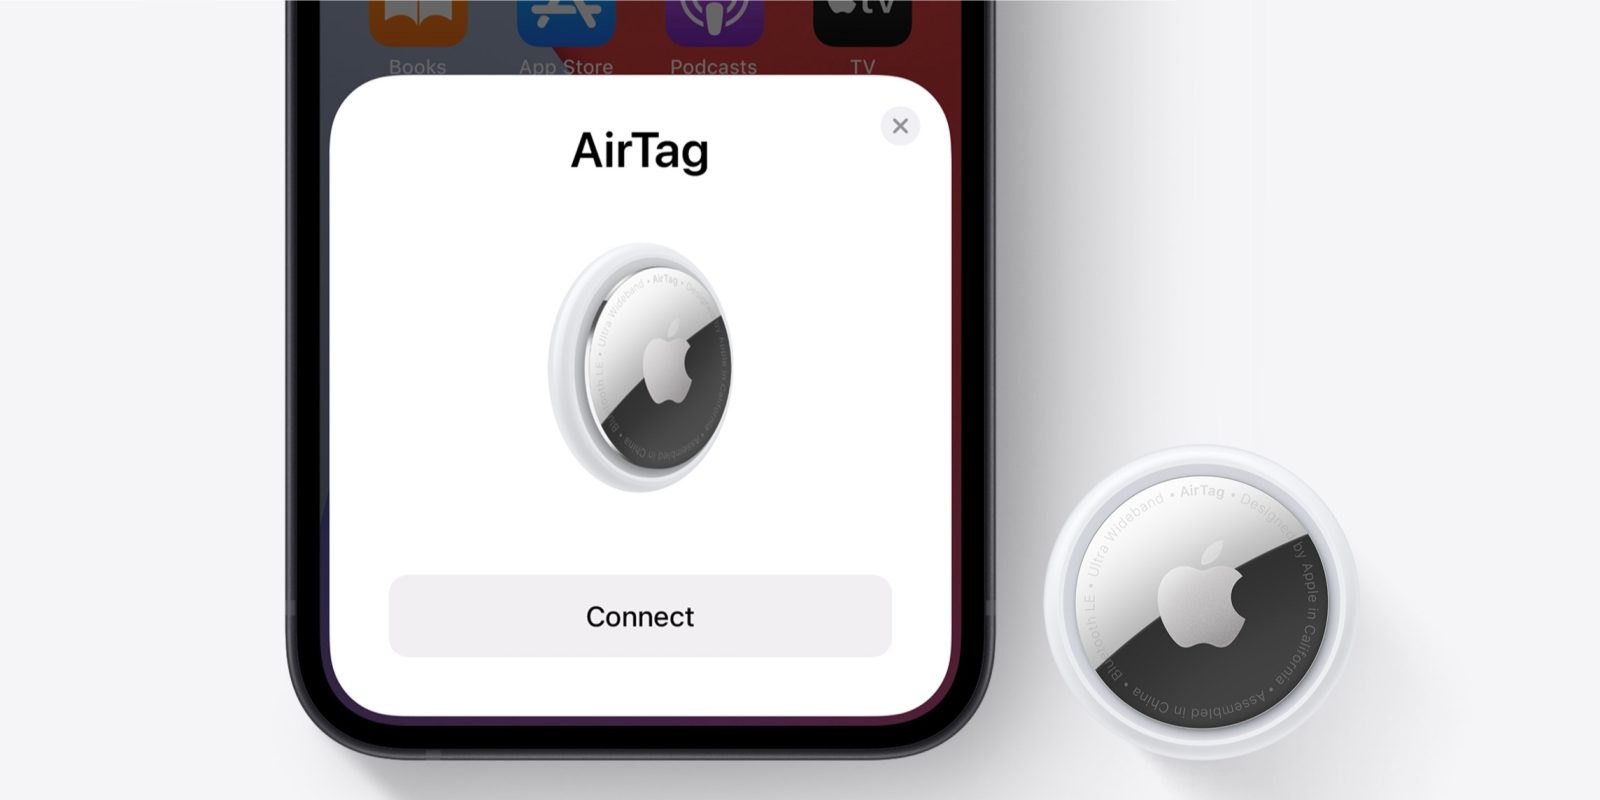 Apple's AirTag tracker will probably help you find your stuff, but